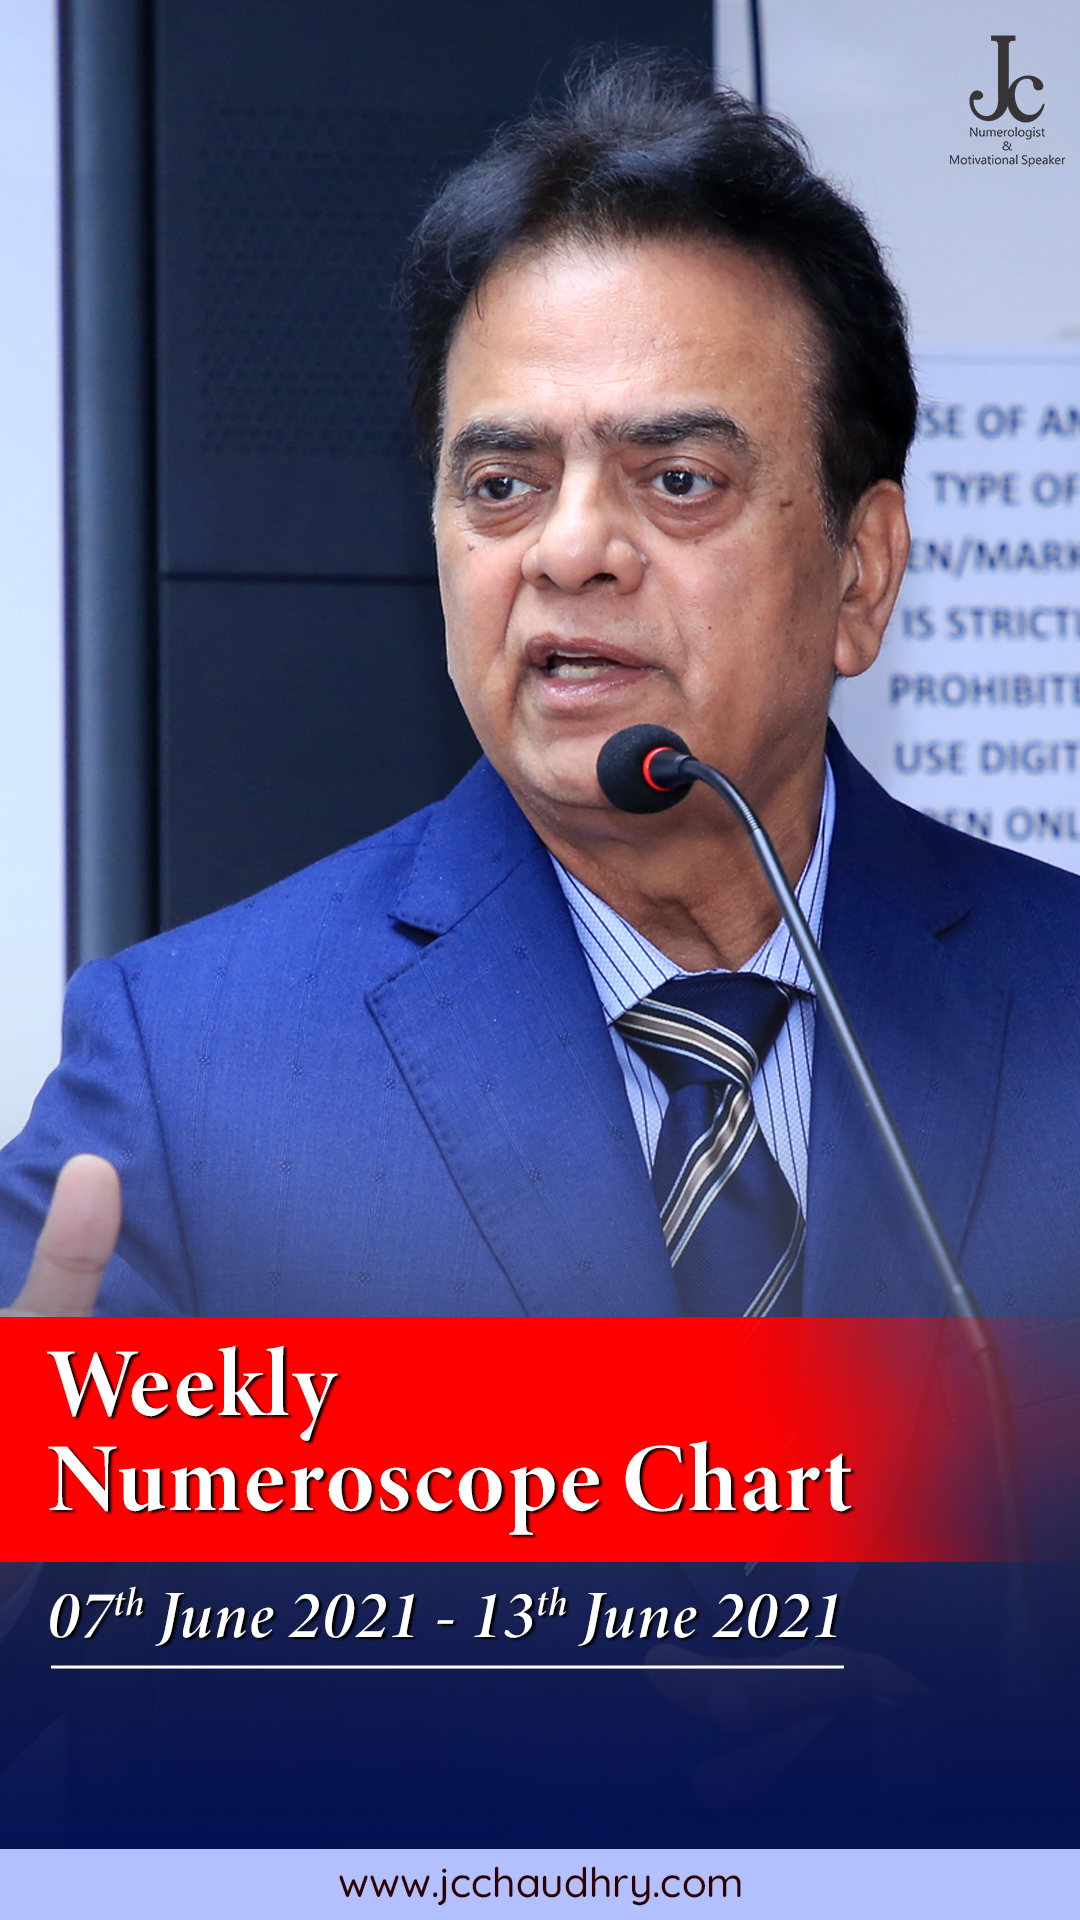 Weekly Numerology Predictions by J C Chaudhry from 7th June to 13th June, 2021